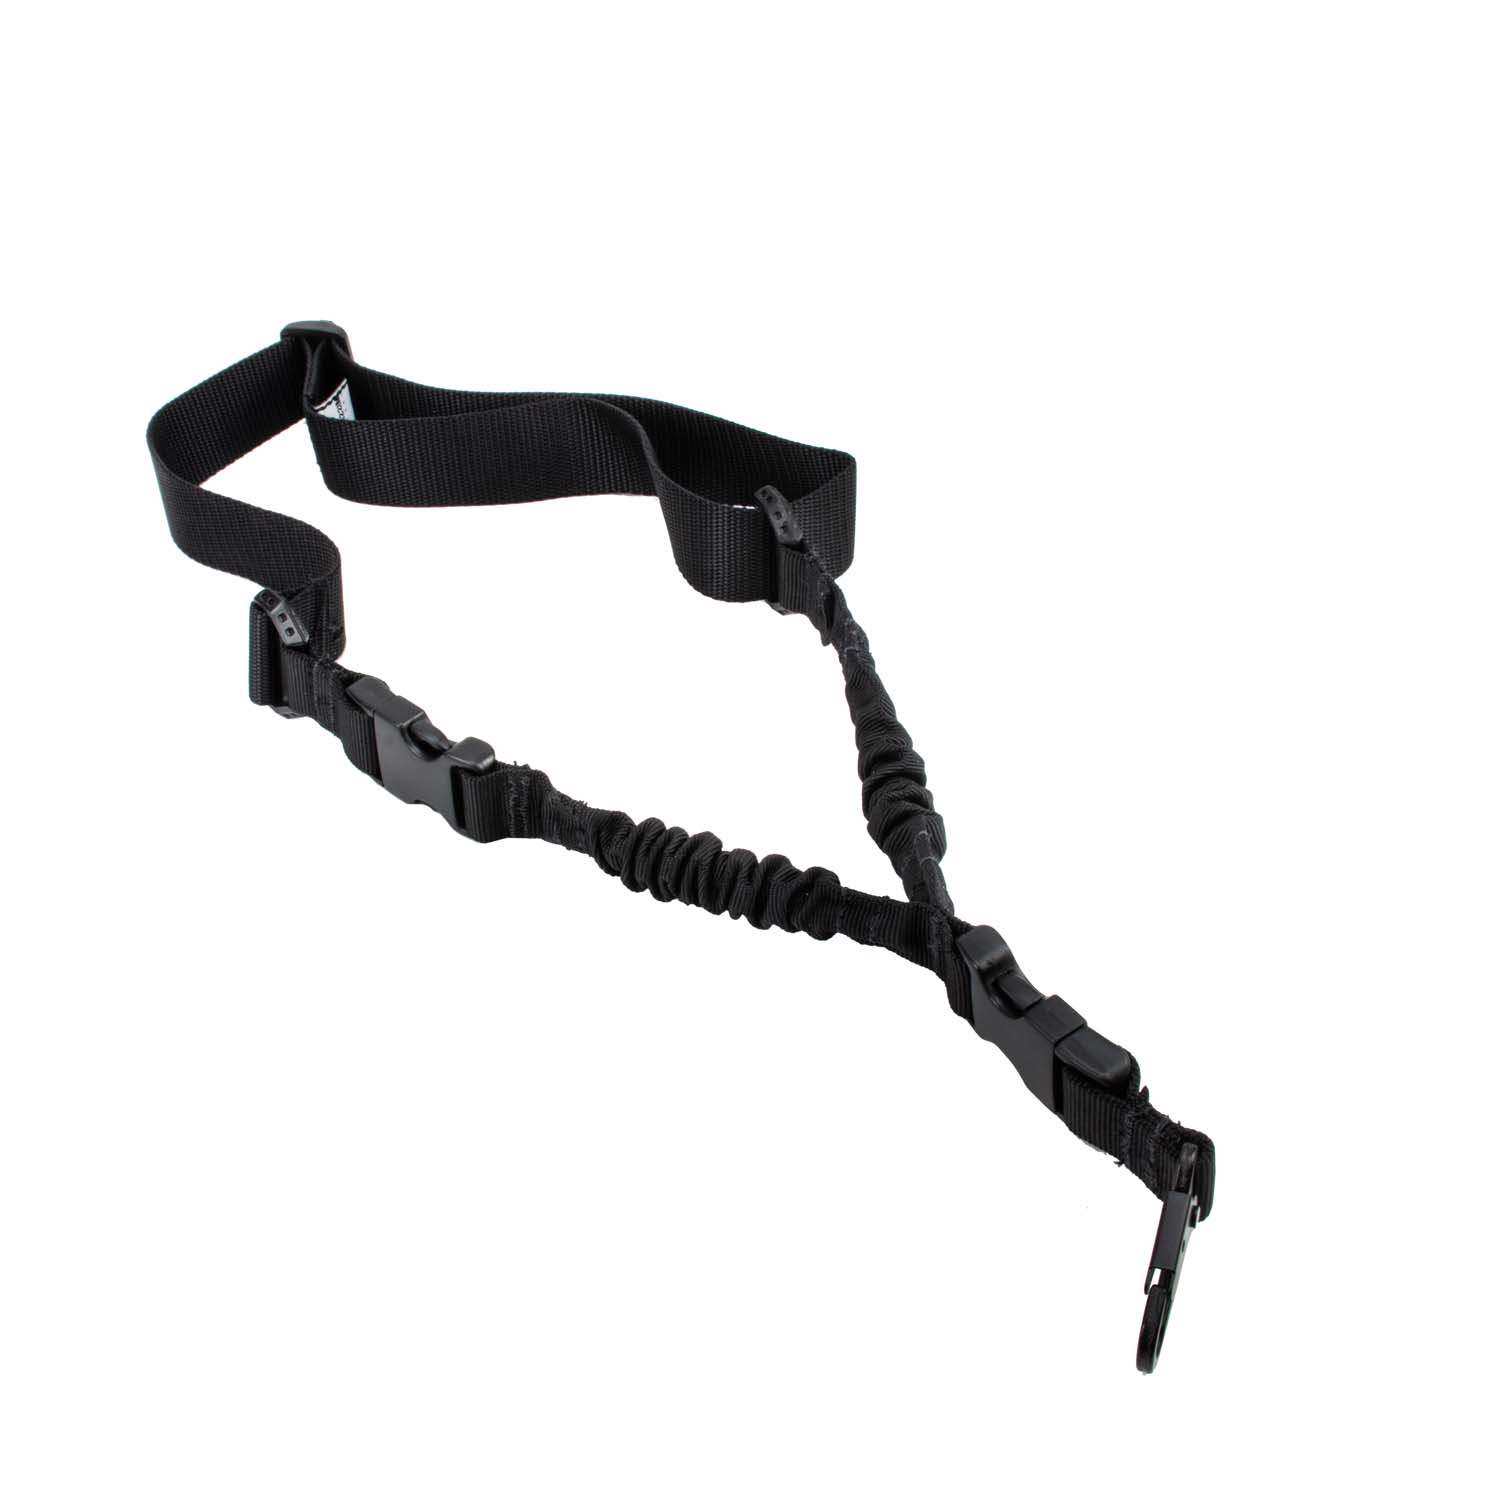 Single Point Bungee Sling ǀ SIG SAUER